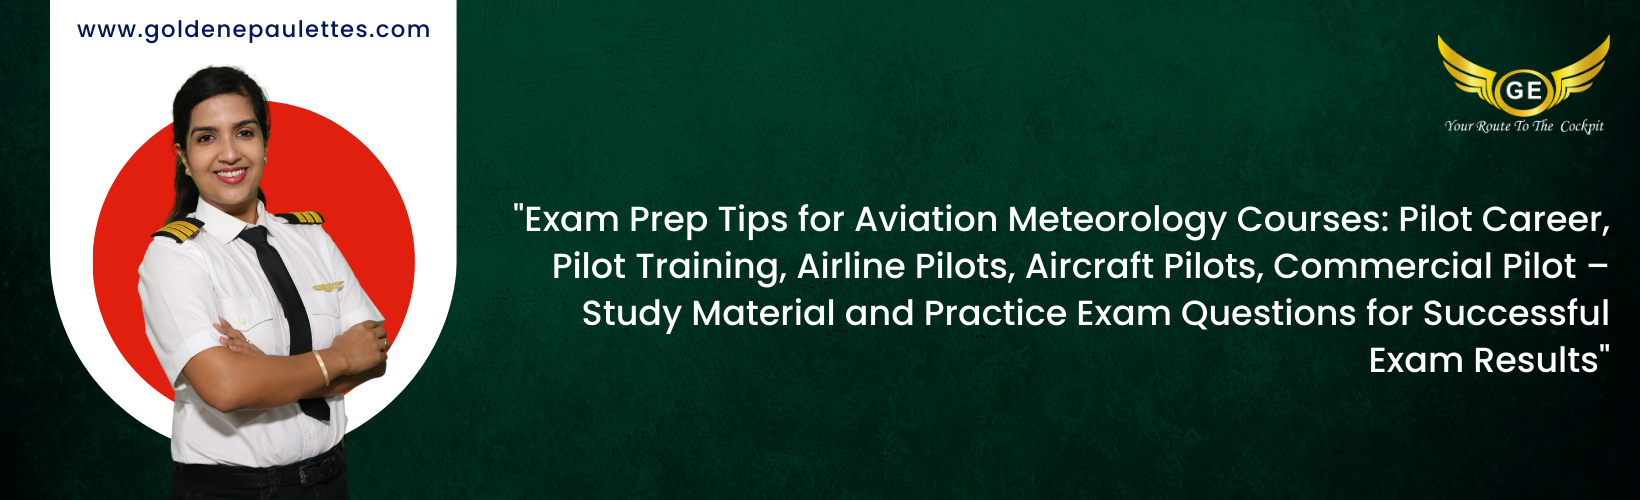 Exam Prep Tips for Aviation Meteorology Courses